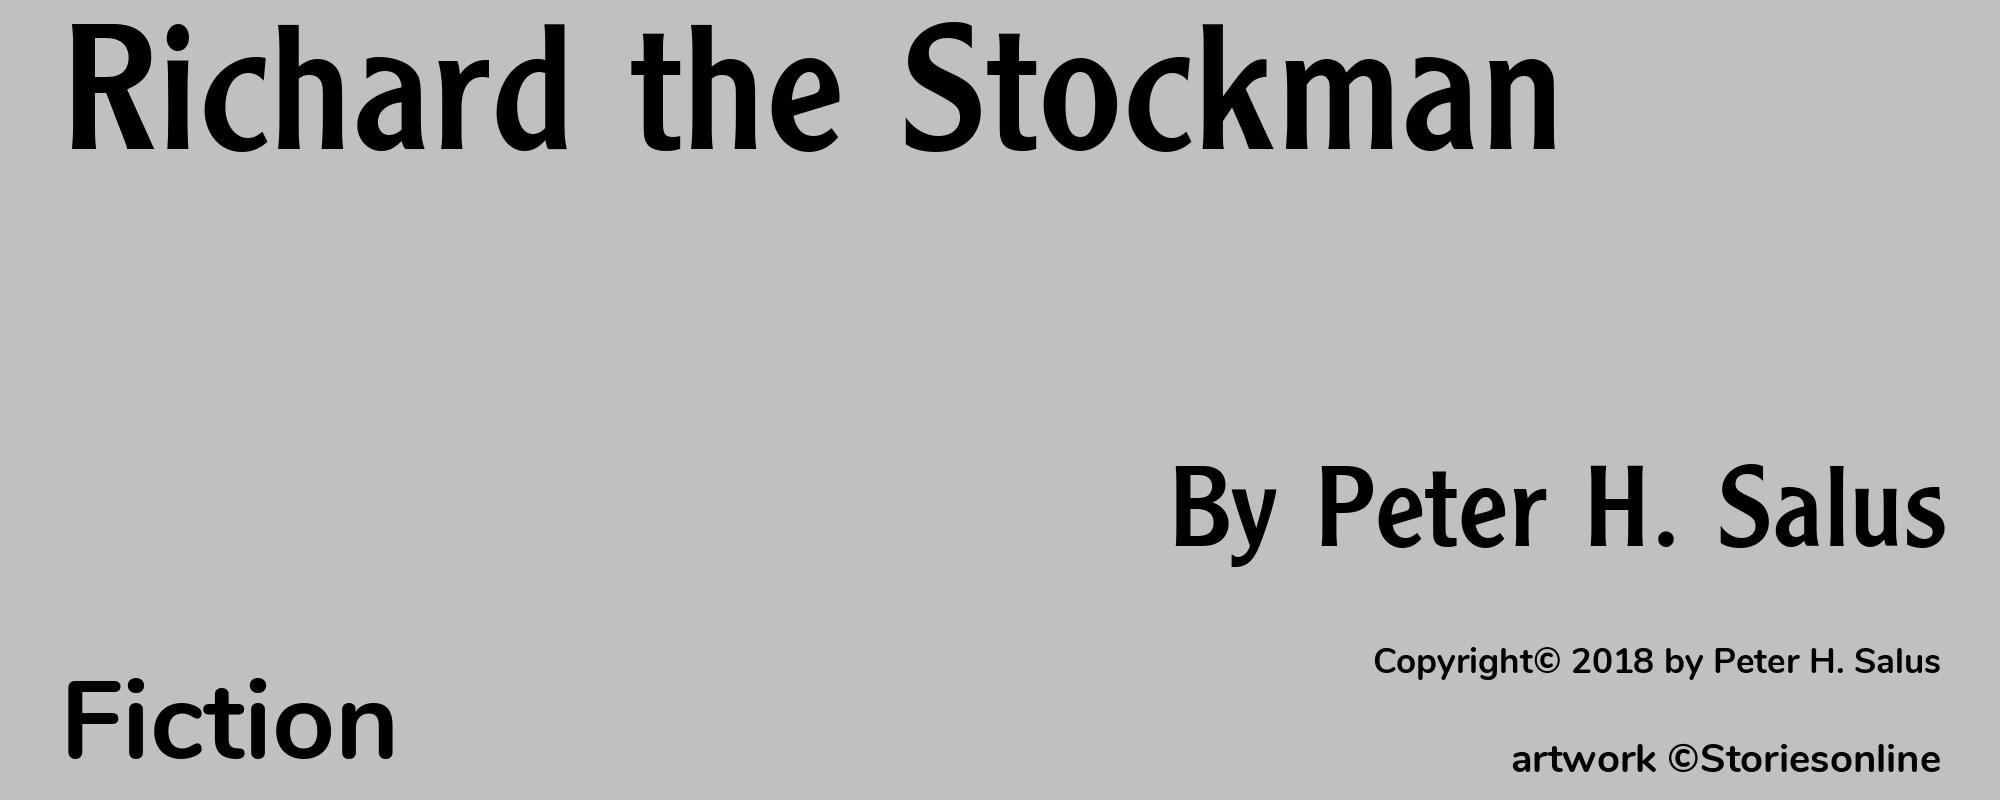 Richard the Stockman - Cover